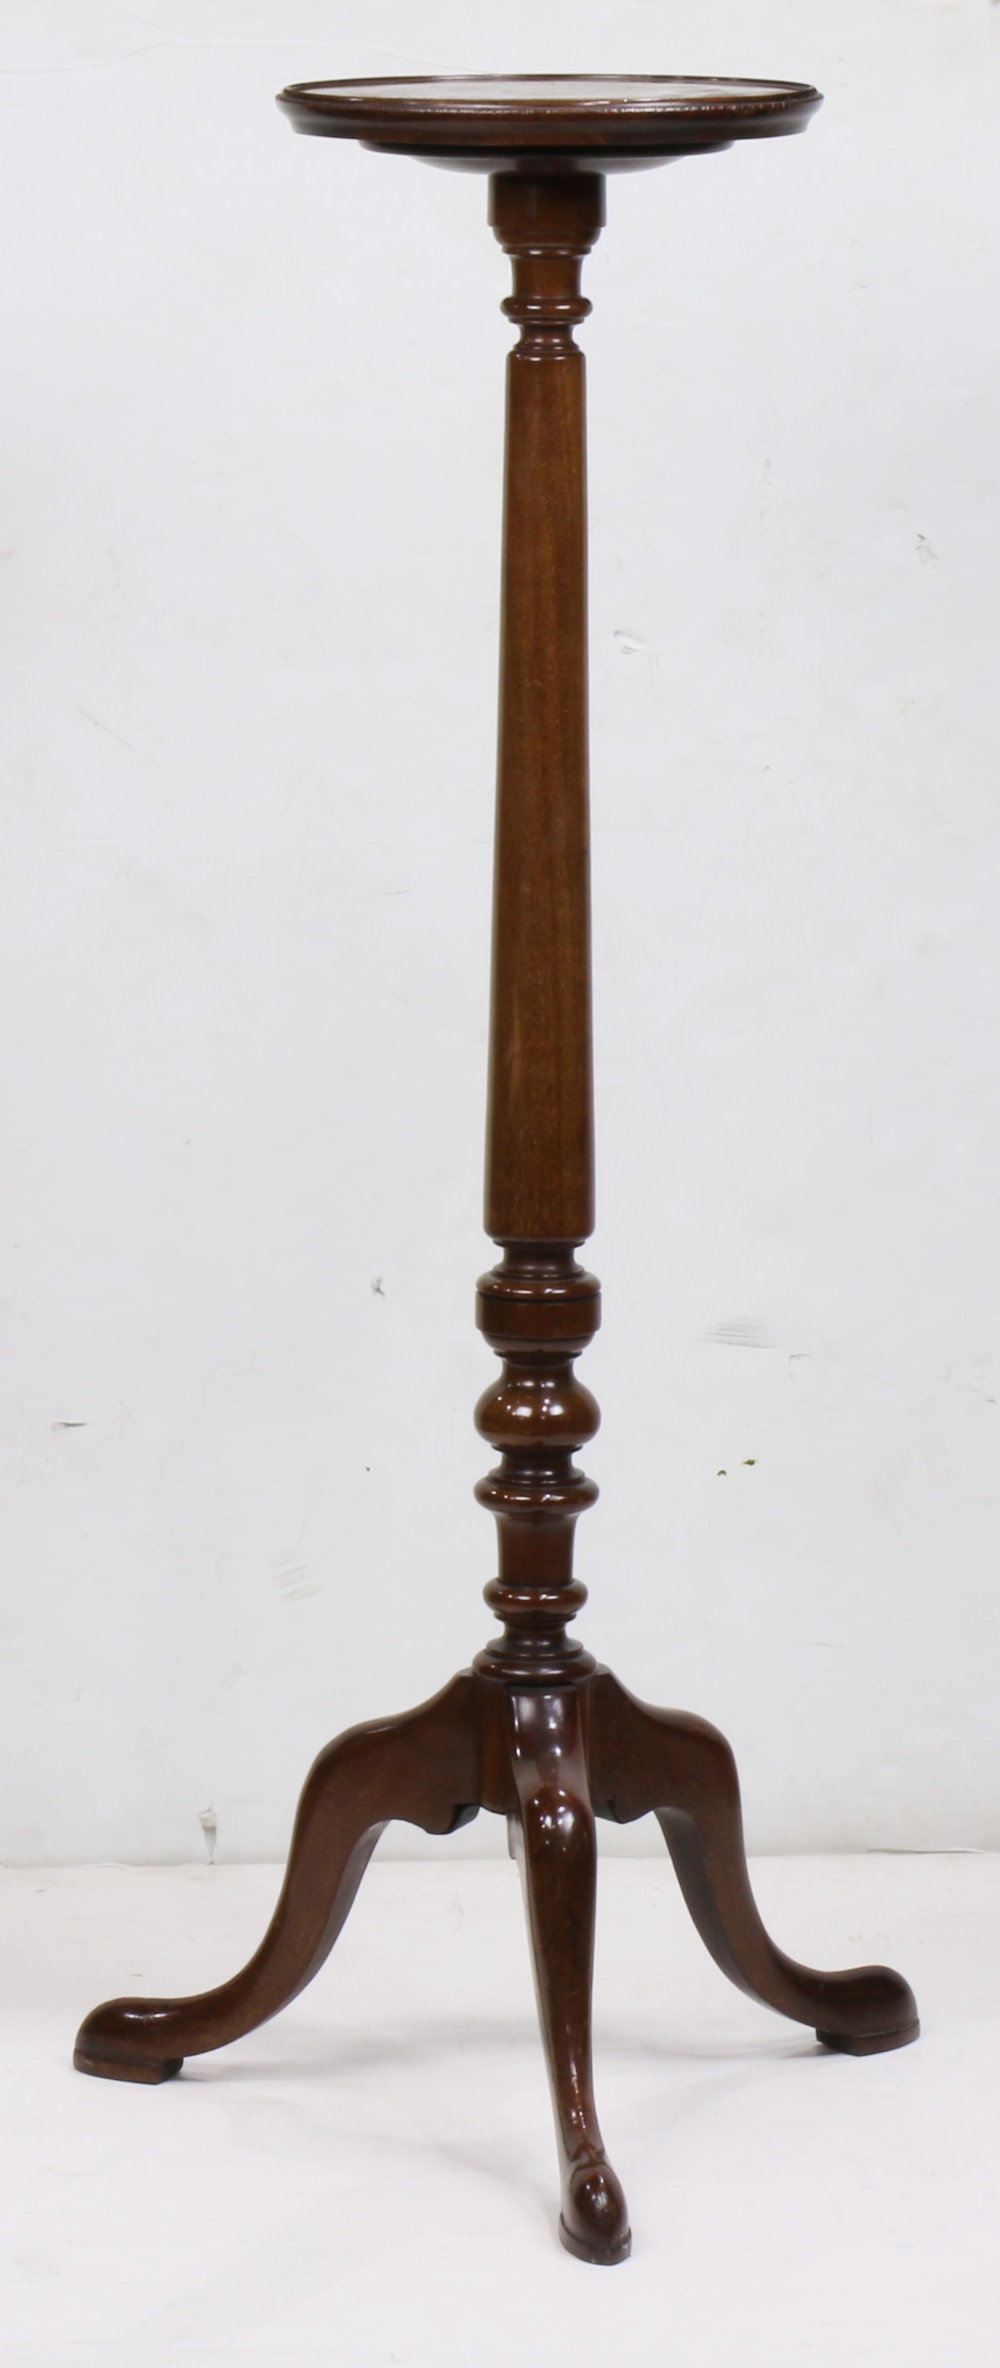 Chippendale style walnut plant stand, having a circular dish top above the turned standard, and